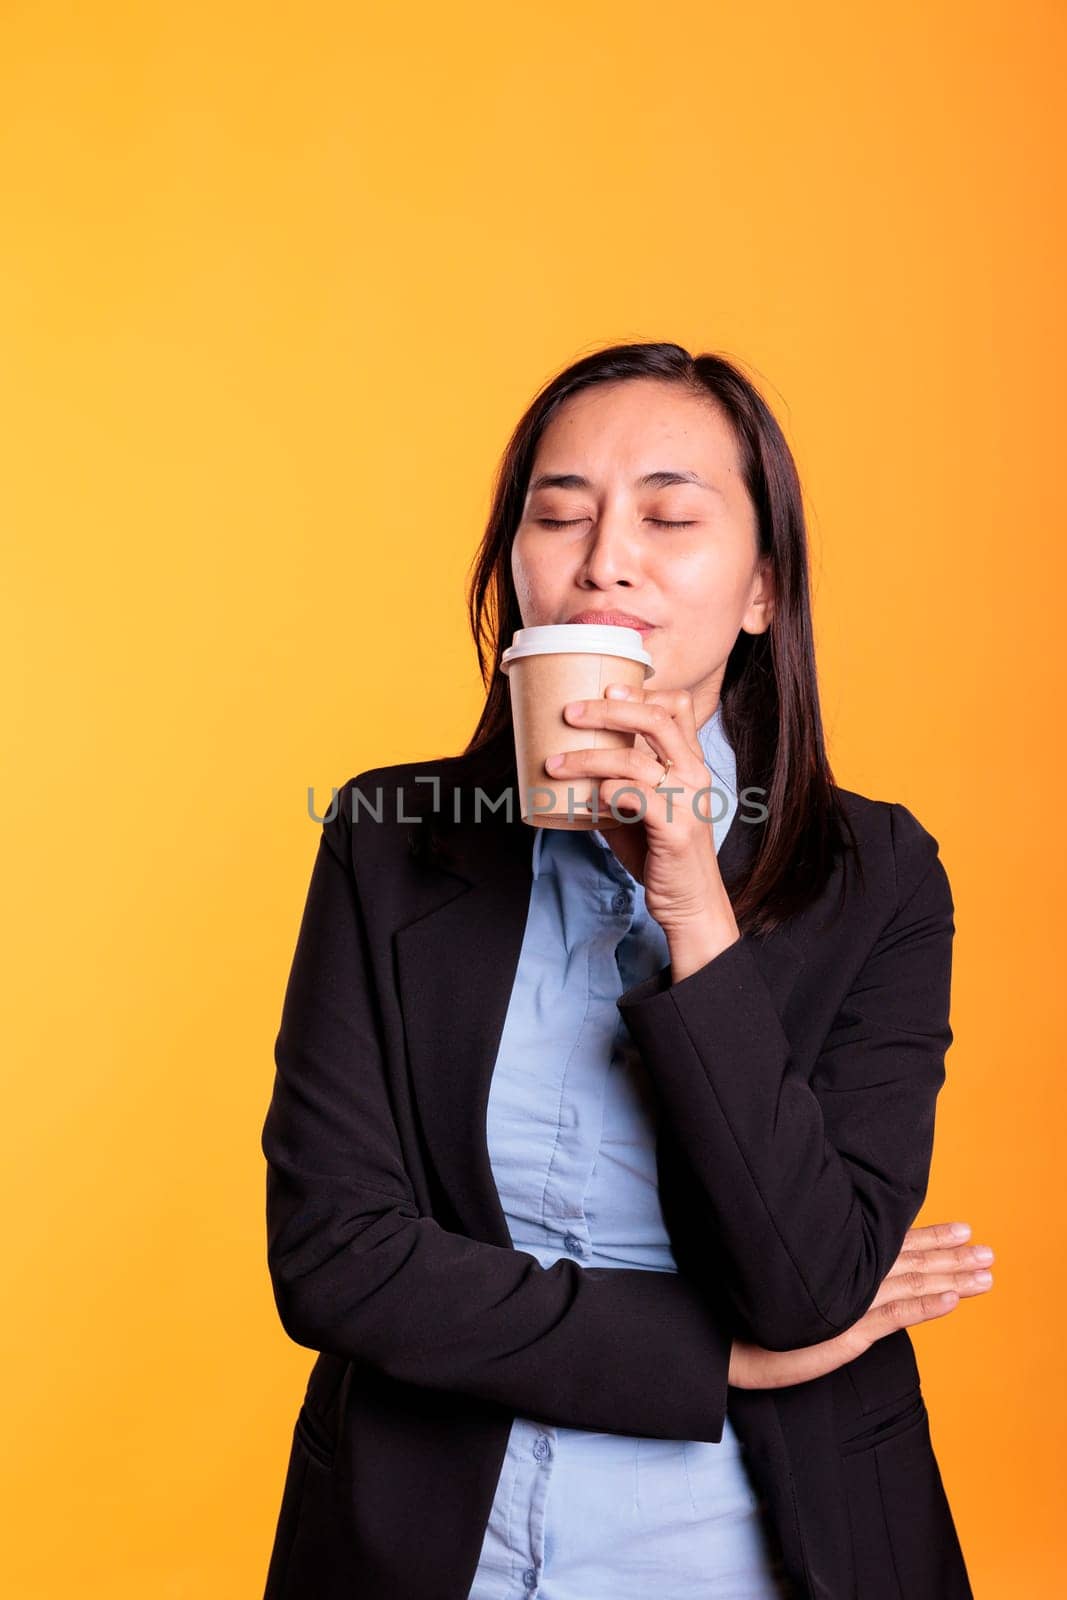 Smiling attractive woman enjoying drinking hot espresso in front of camera, posing in studio over yellow background. Smiling confident model in formal suit drinking hot beverage relaxing